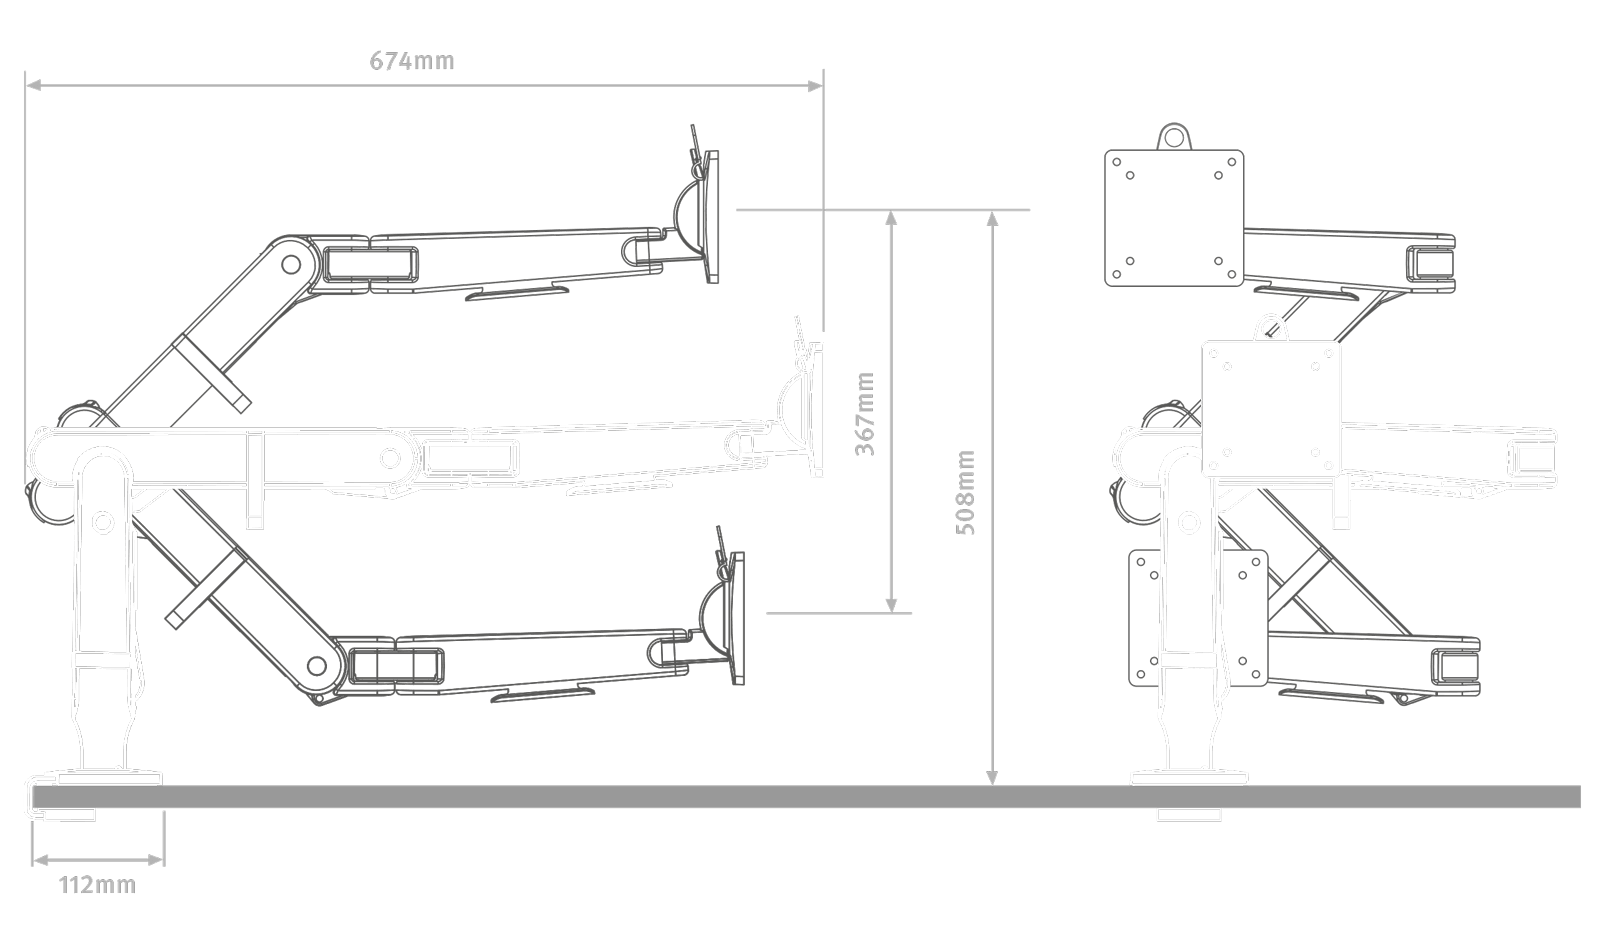 Illustration, in white on a black background, of the Ollin Monitor Arm, shows height specifications.